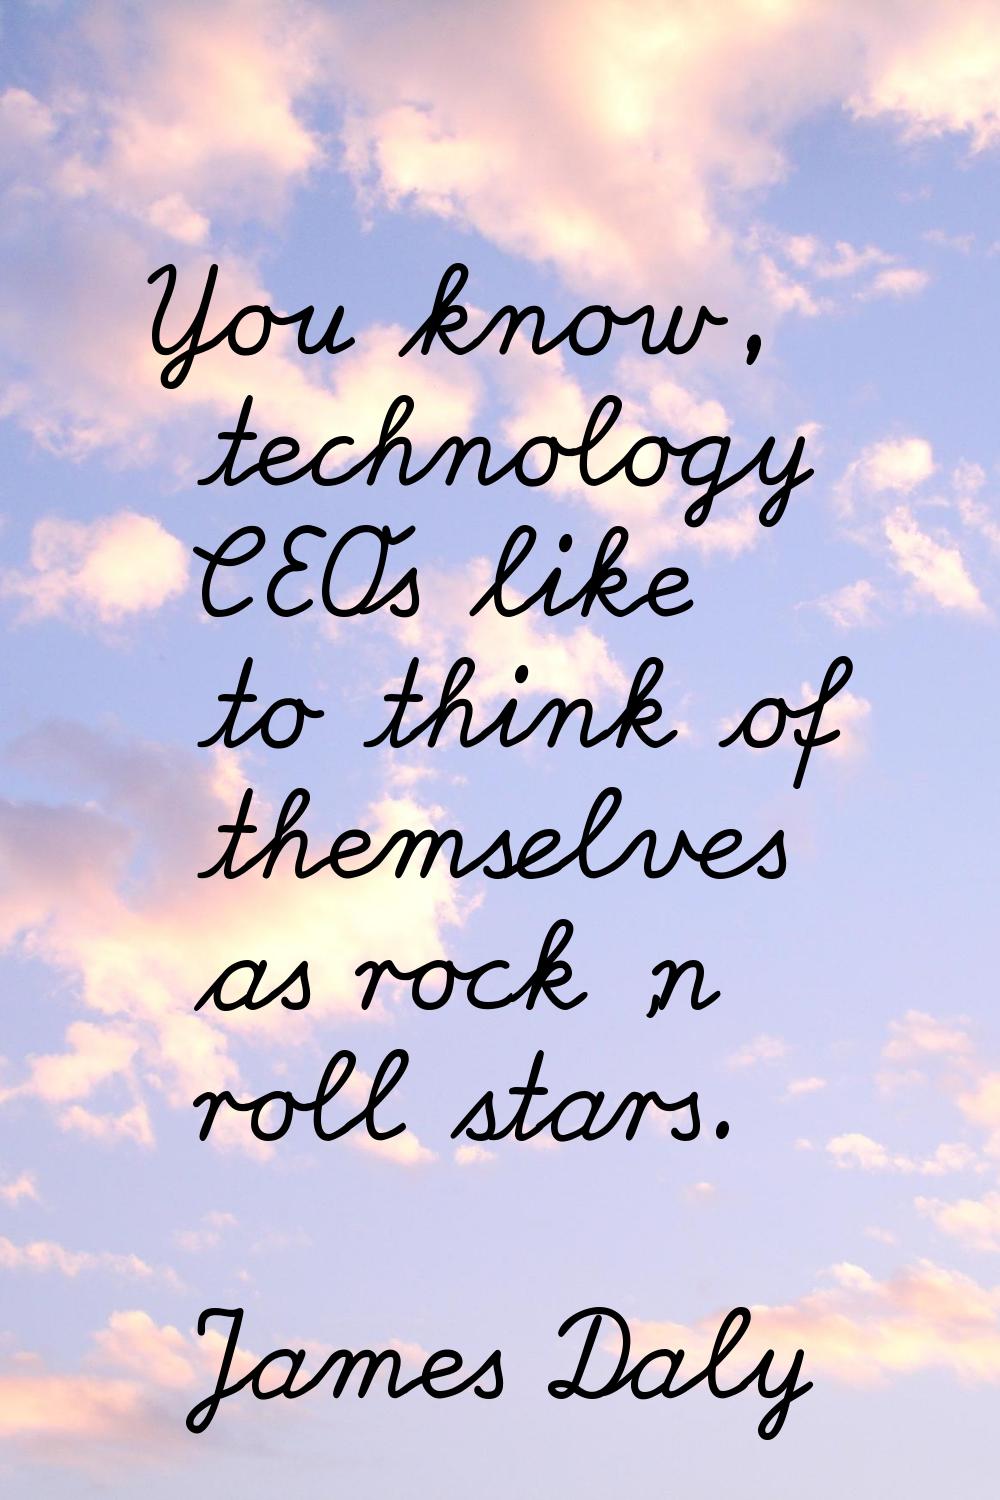 You know, technology CEOs like to think of themselves as rock 'n roll stars.